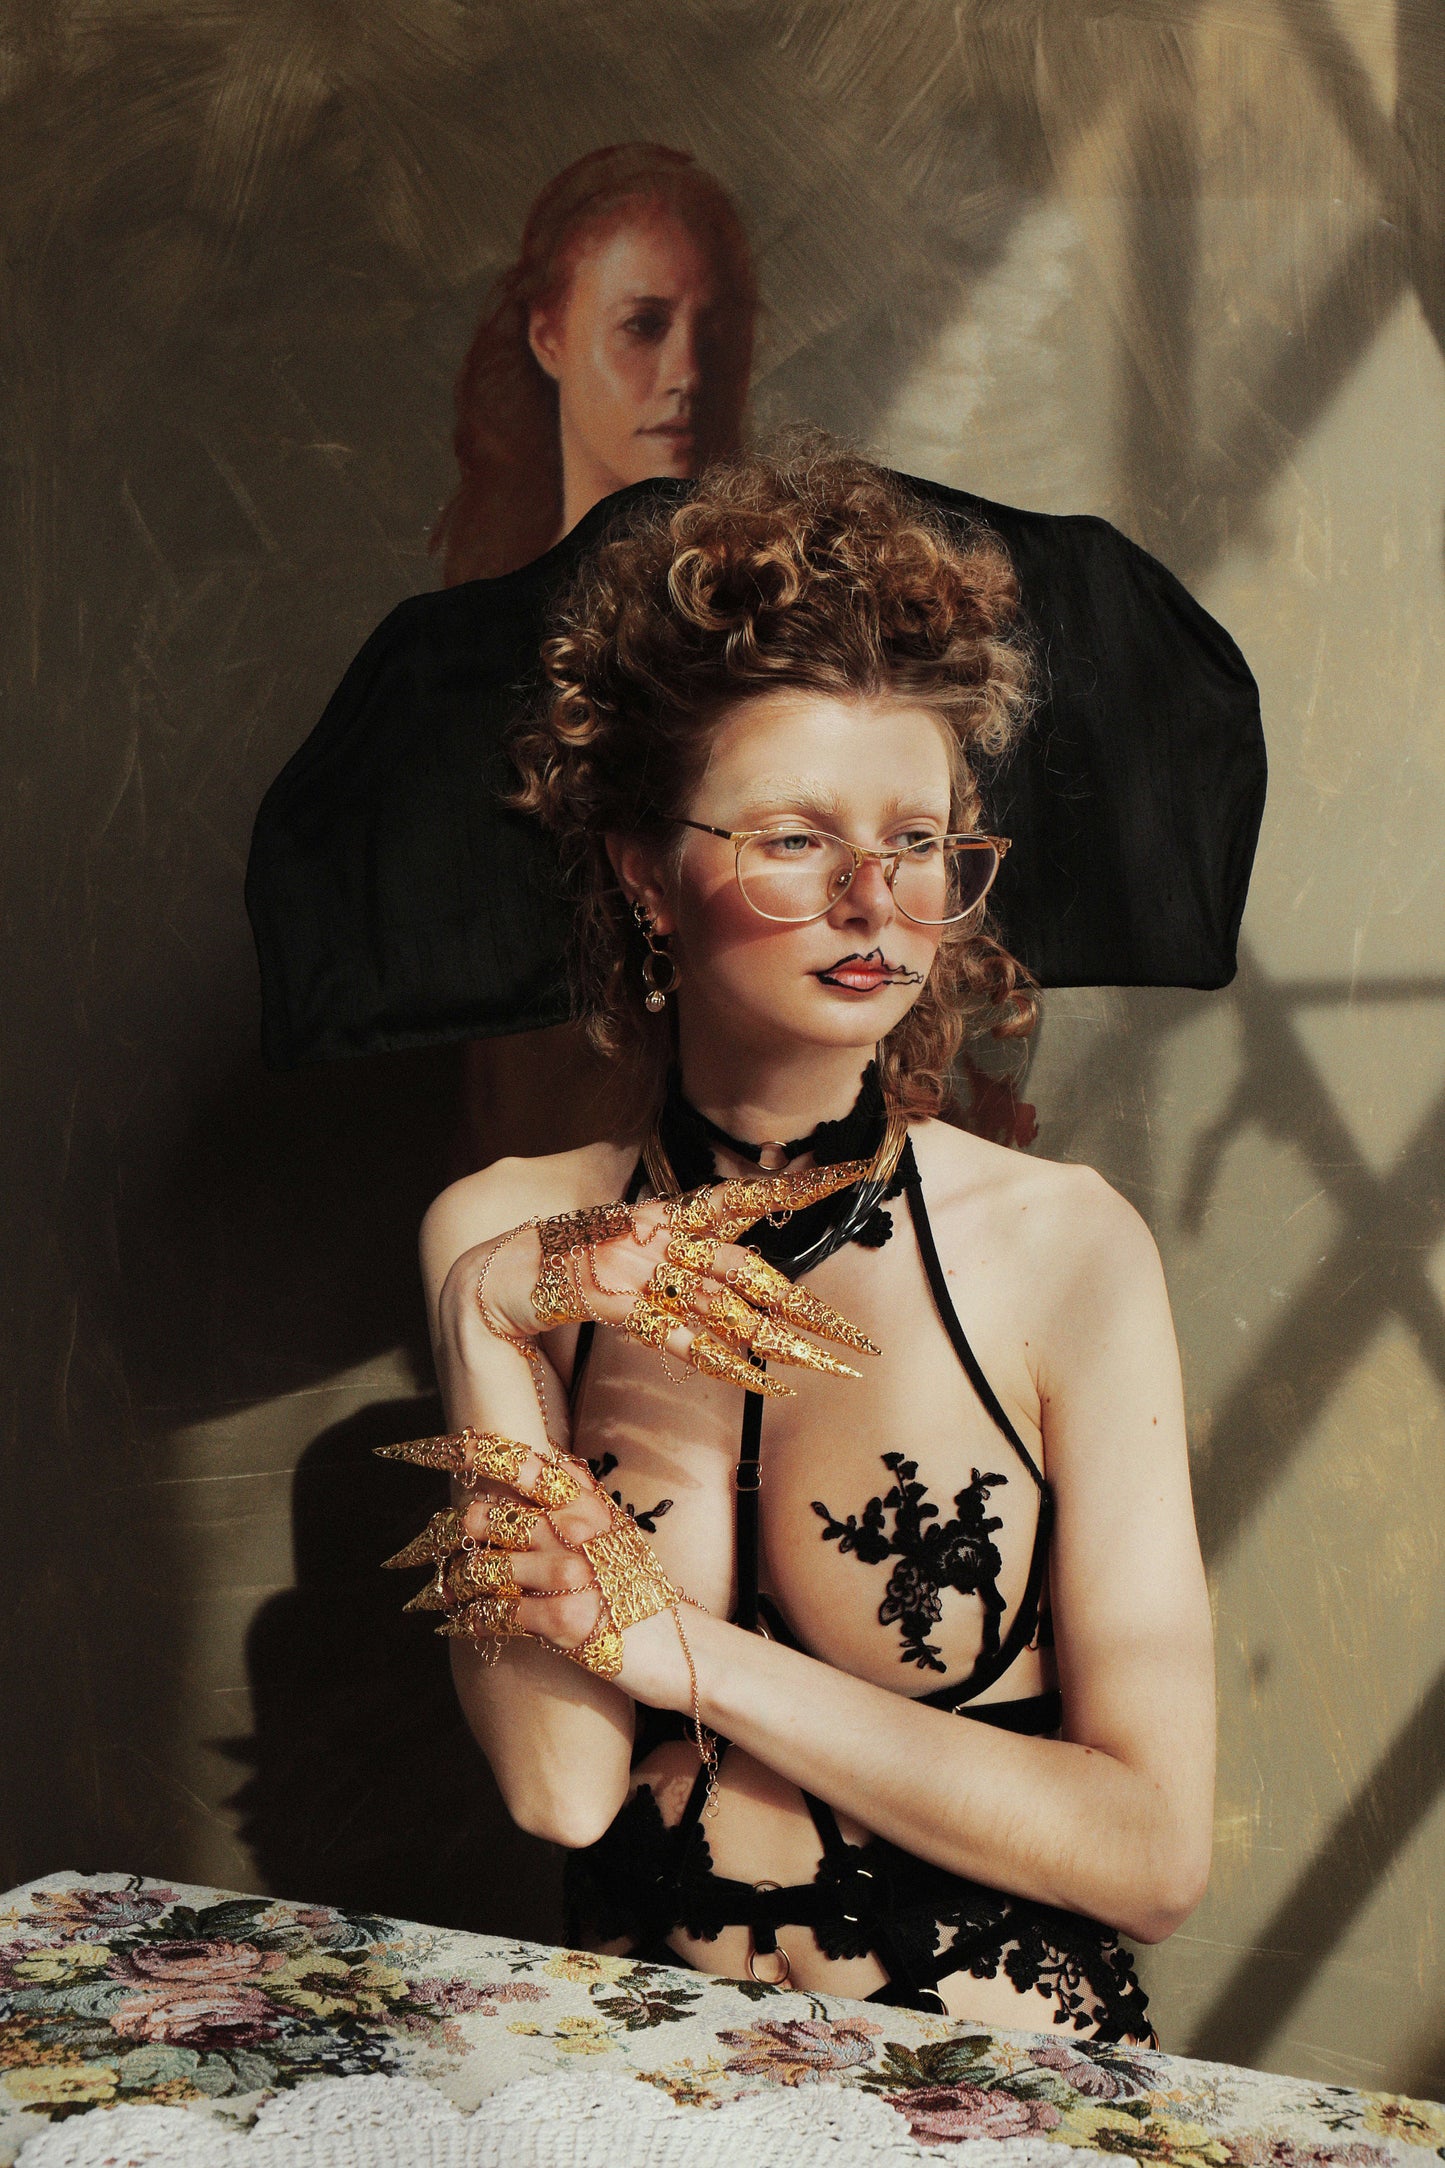 In a vogue editorial, a model strikes a pose with Myril Jewels' luxurious full hand gold metal glove, adorned with claw rings. The opulent neo-goth piece complements her avant-garde look, perfect for gothic-chic aficionados and a bold statement at any upscale event or festival.